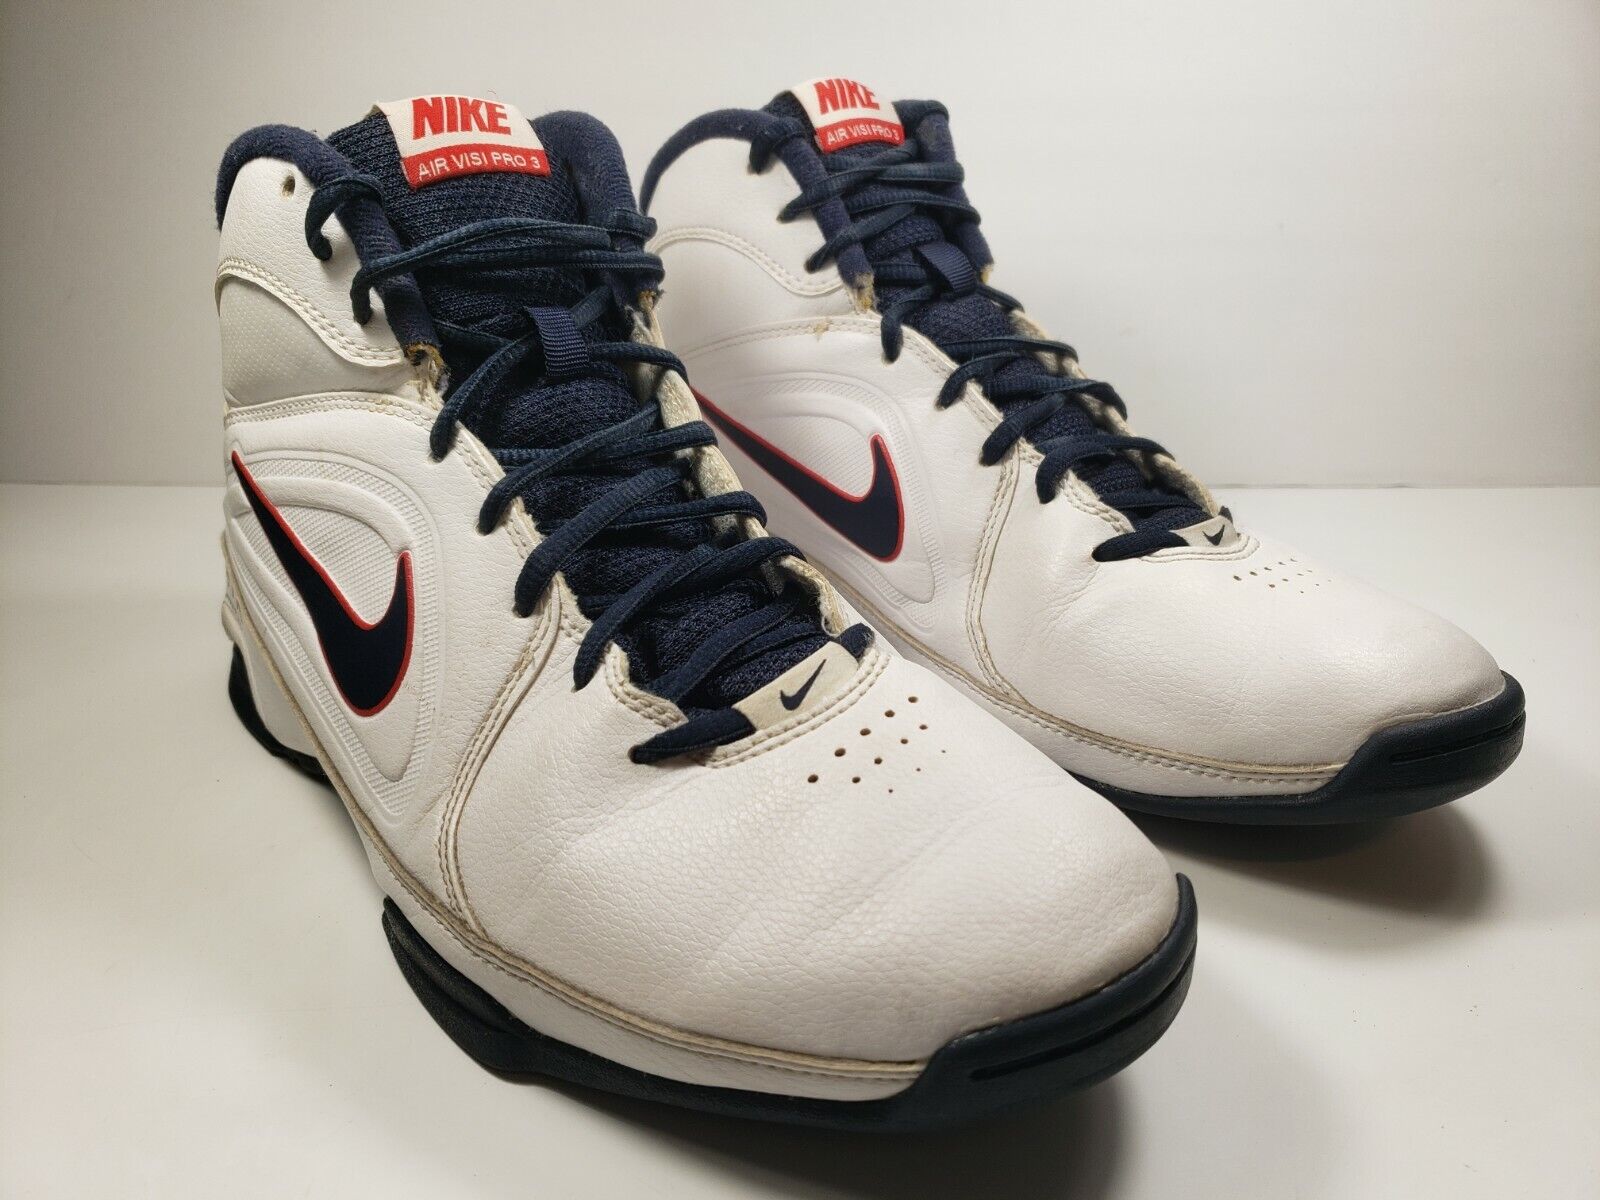 Nike Air Visi Pro 3 525746-104 White Men's Basketball Shoes Sneakers - Size  8